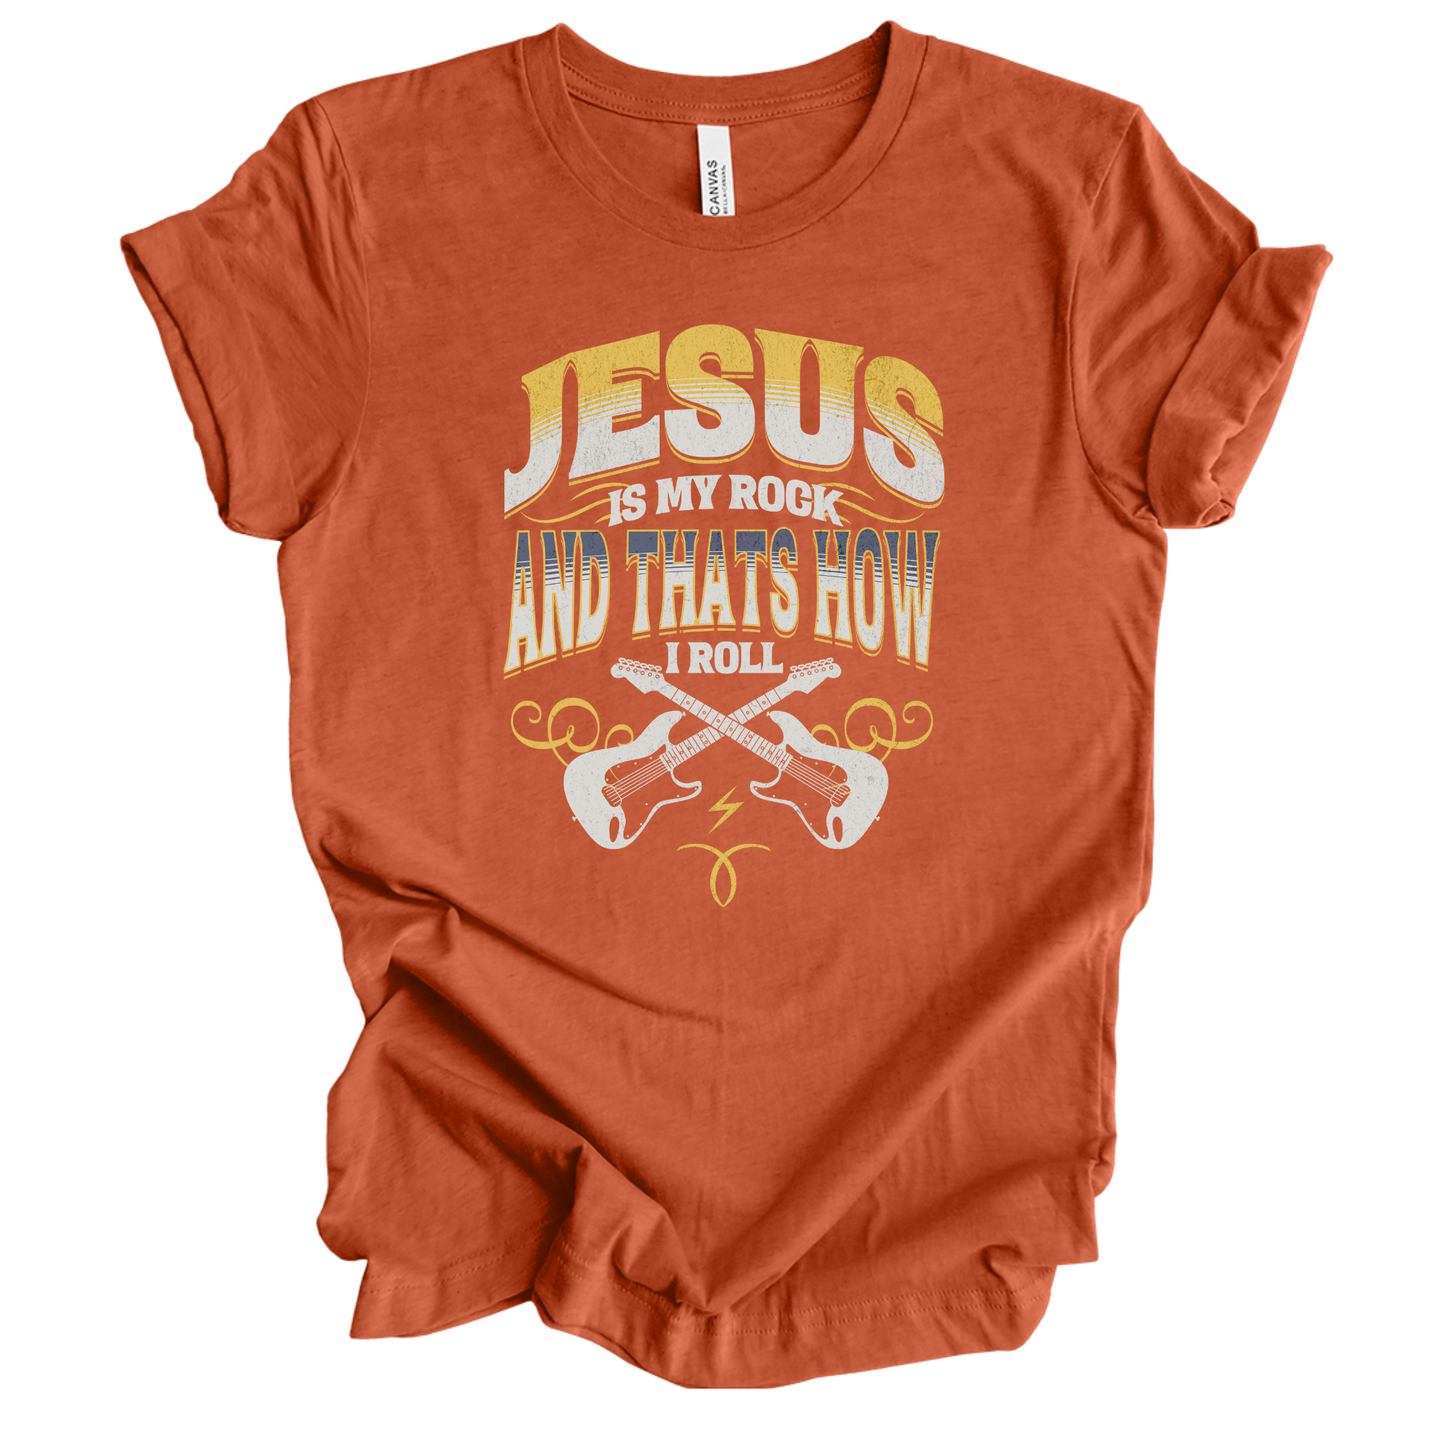 Jesus is my rock and that’s how I roll graphic tee